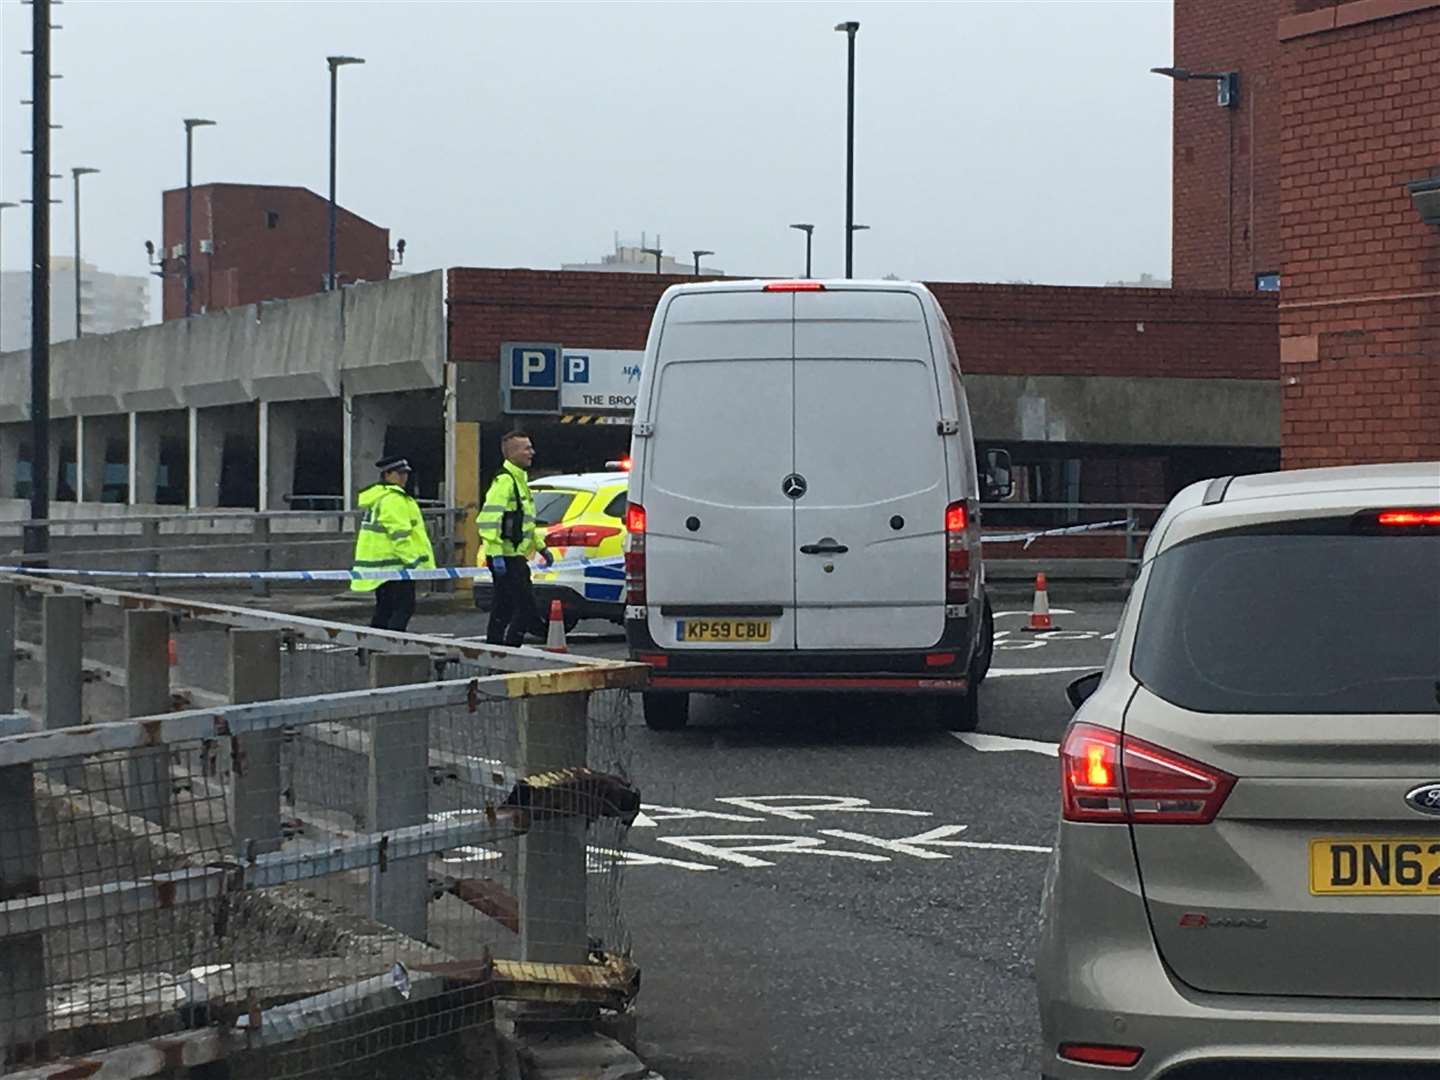 Police cordoned Pentagon Shopping centre and the Medway Council owned multi story car park